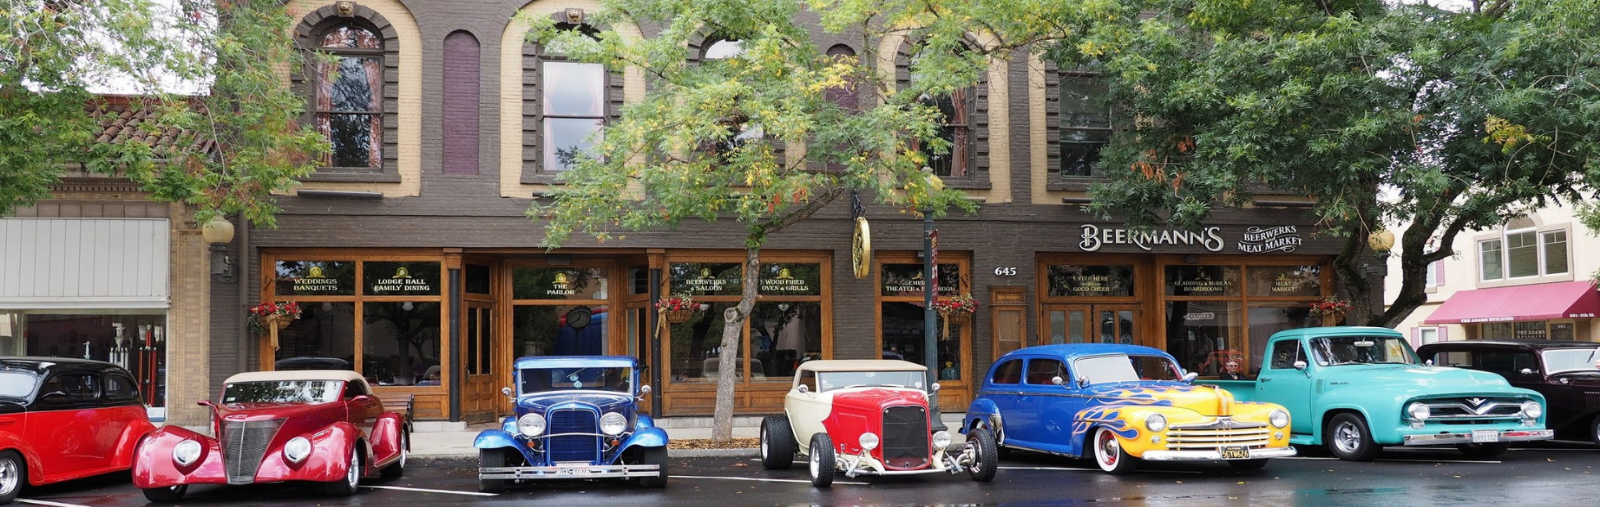 Street view with classic cars